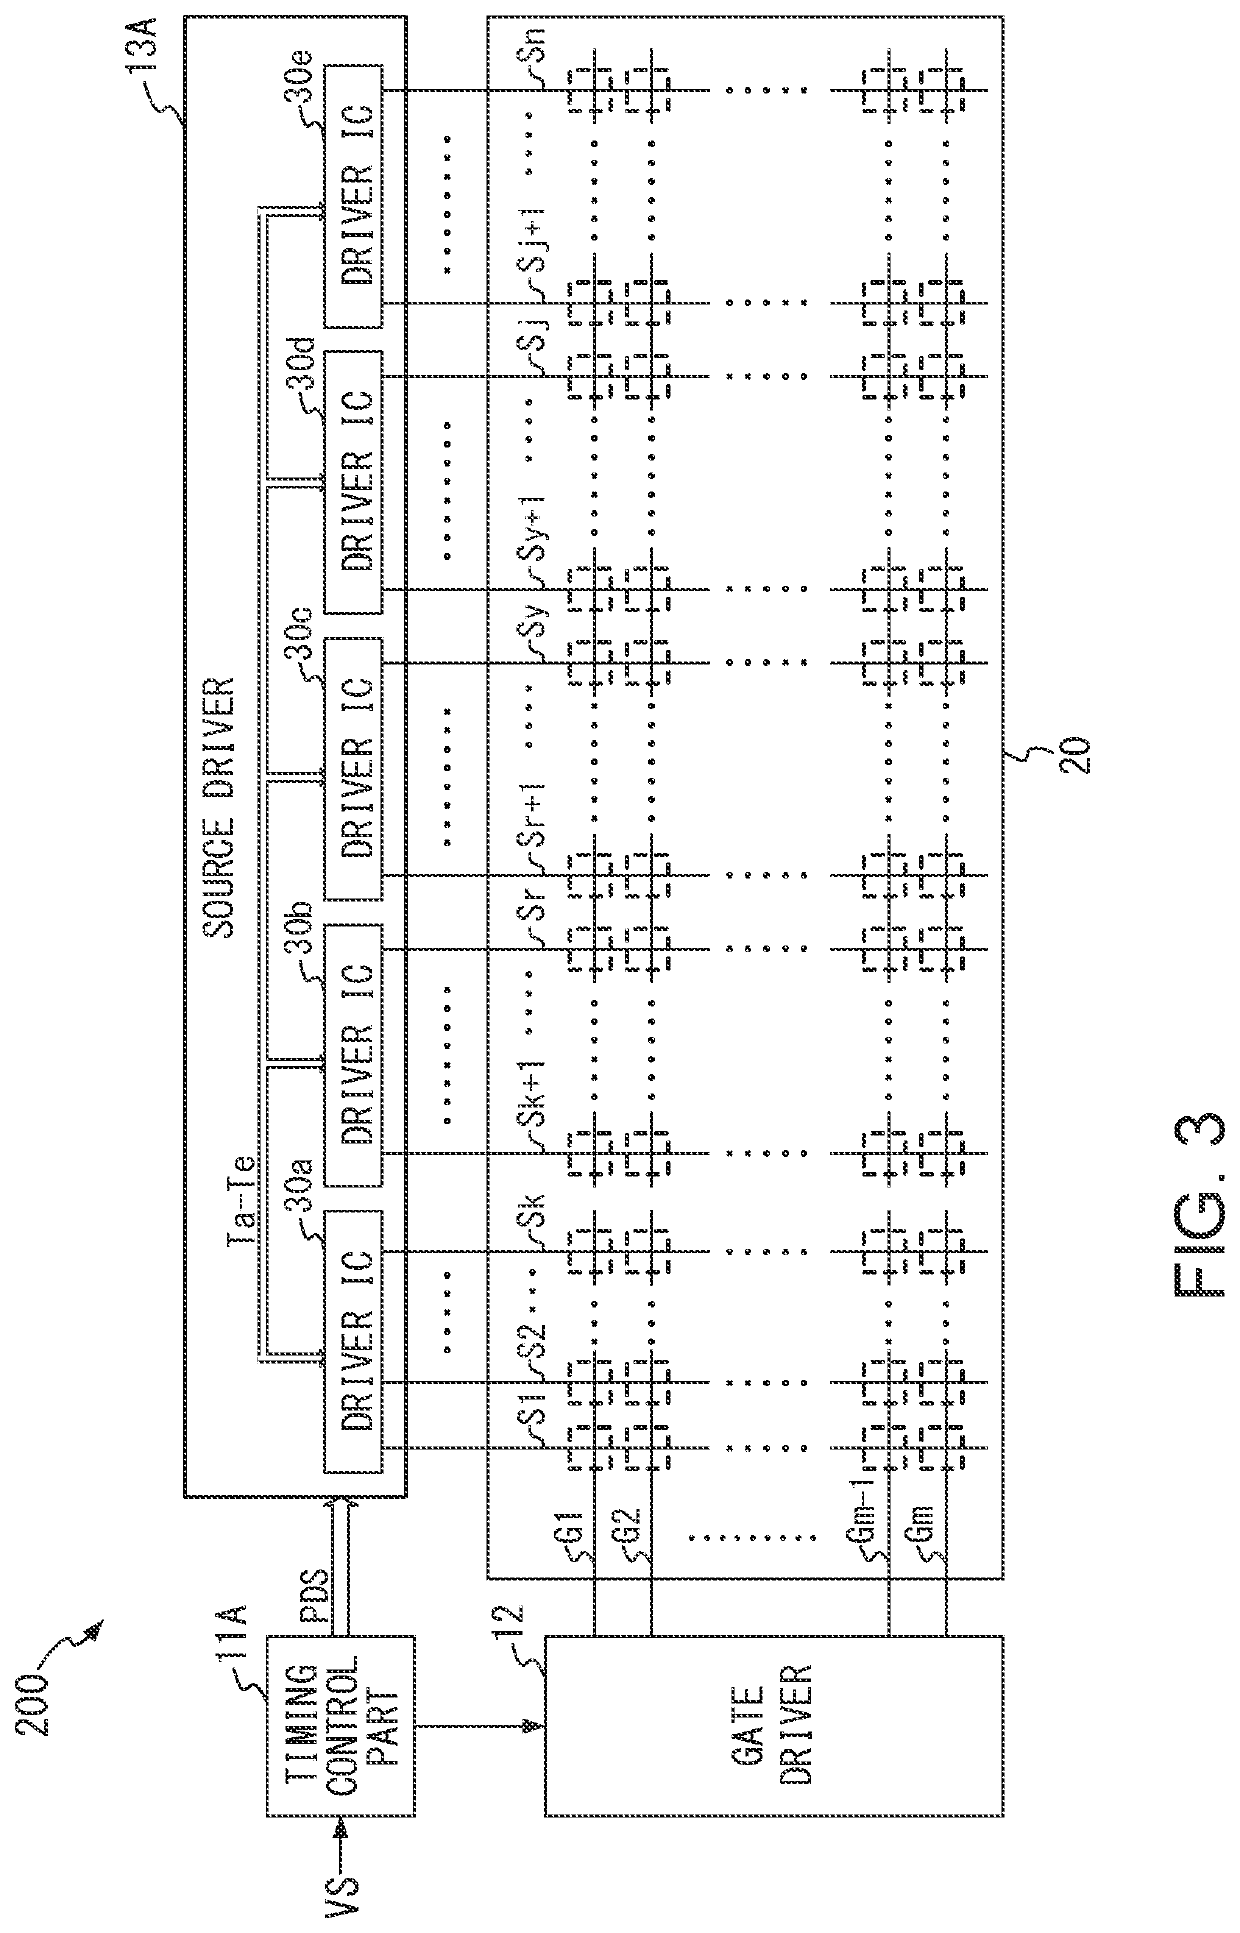 Display driver and display device